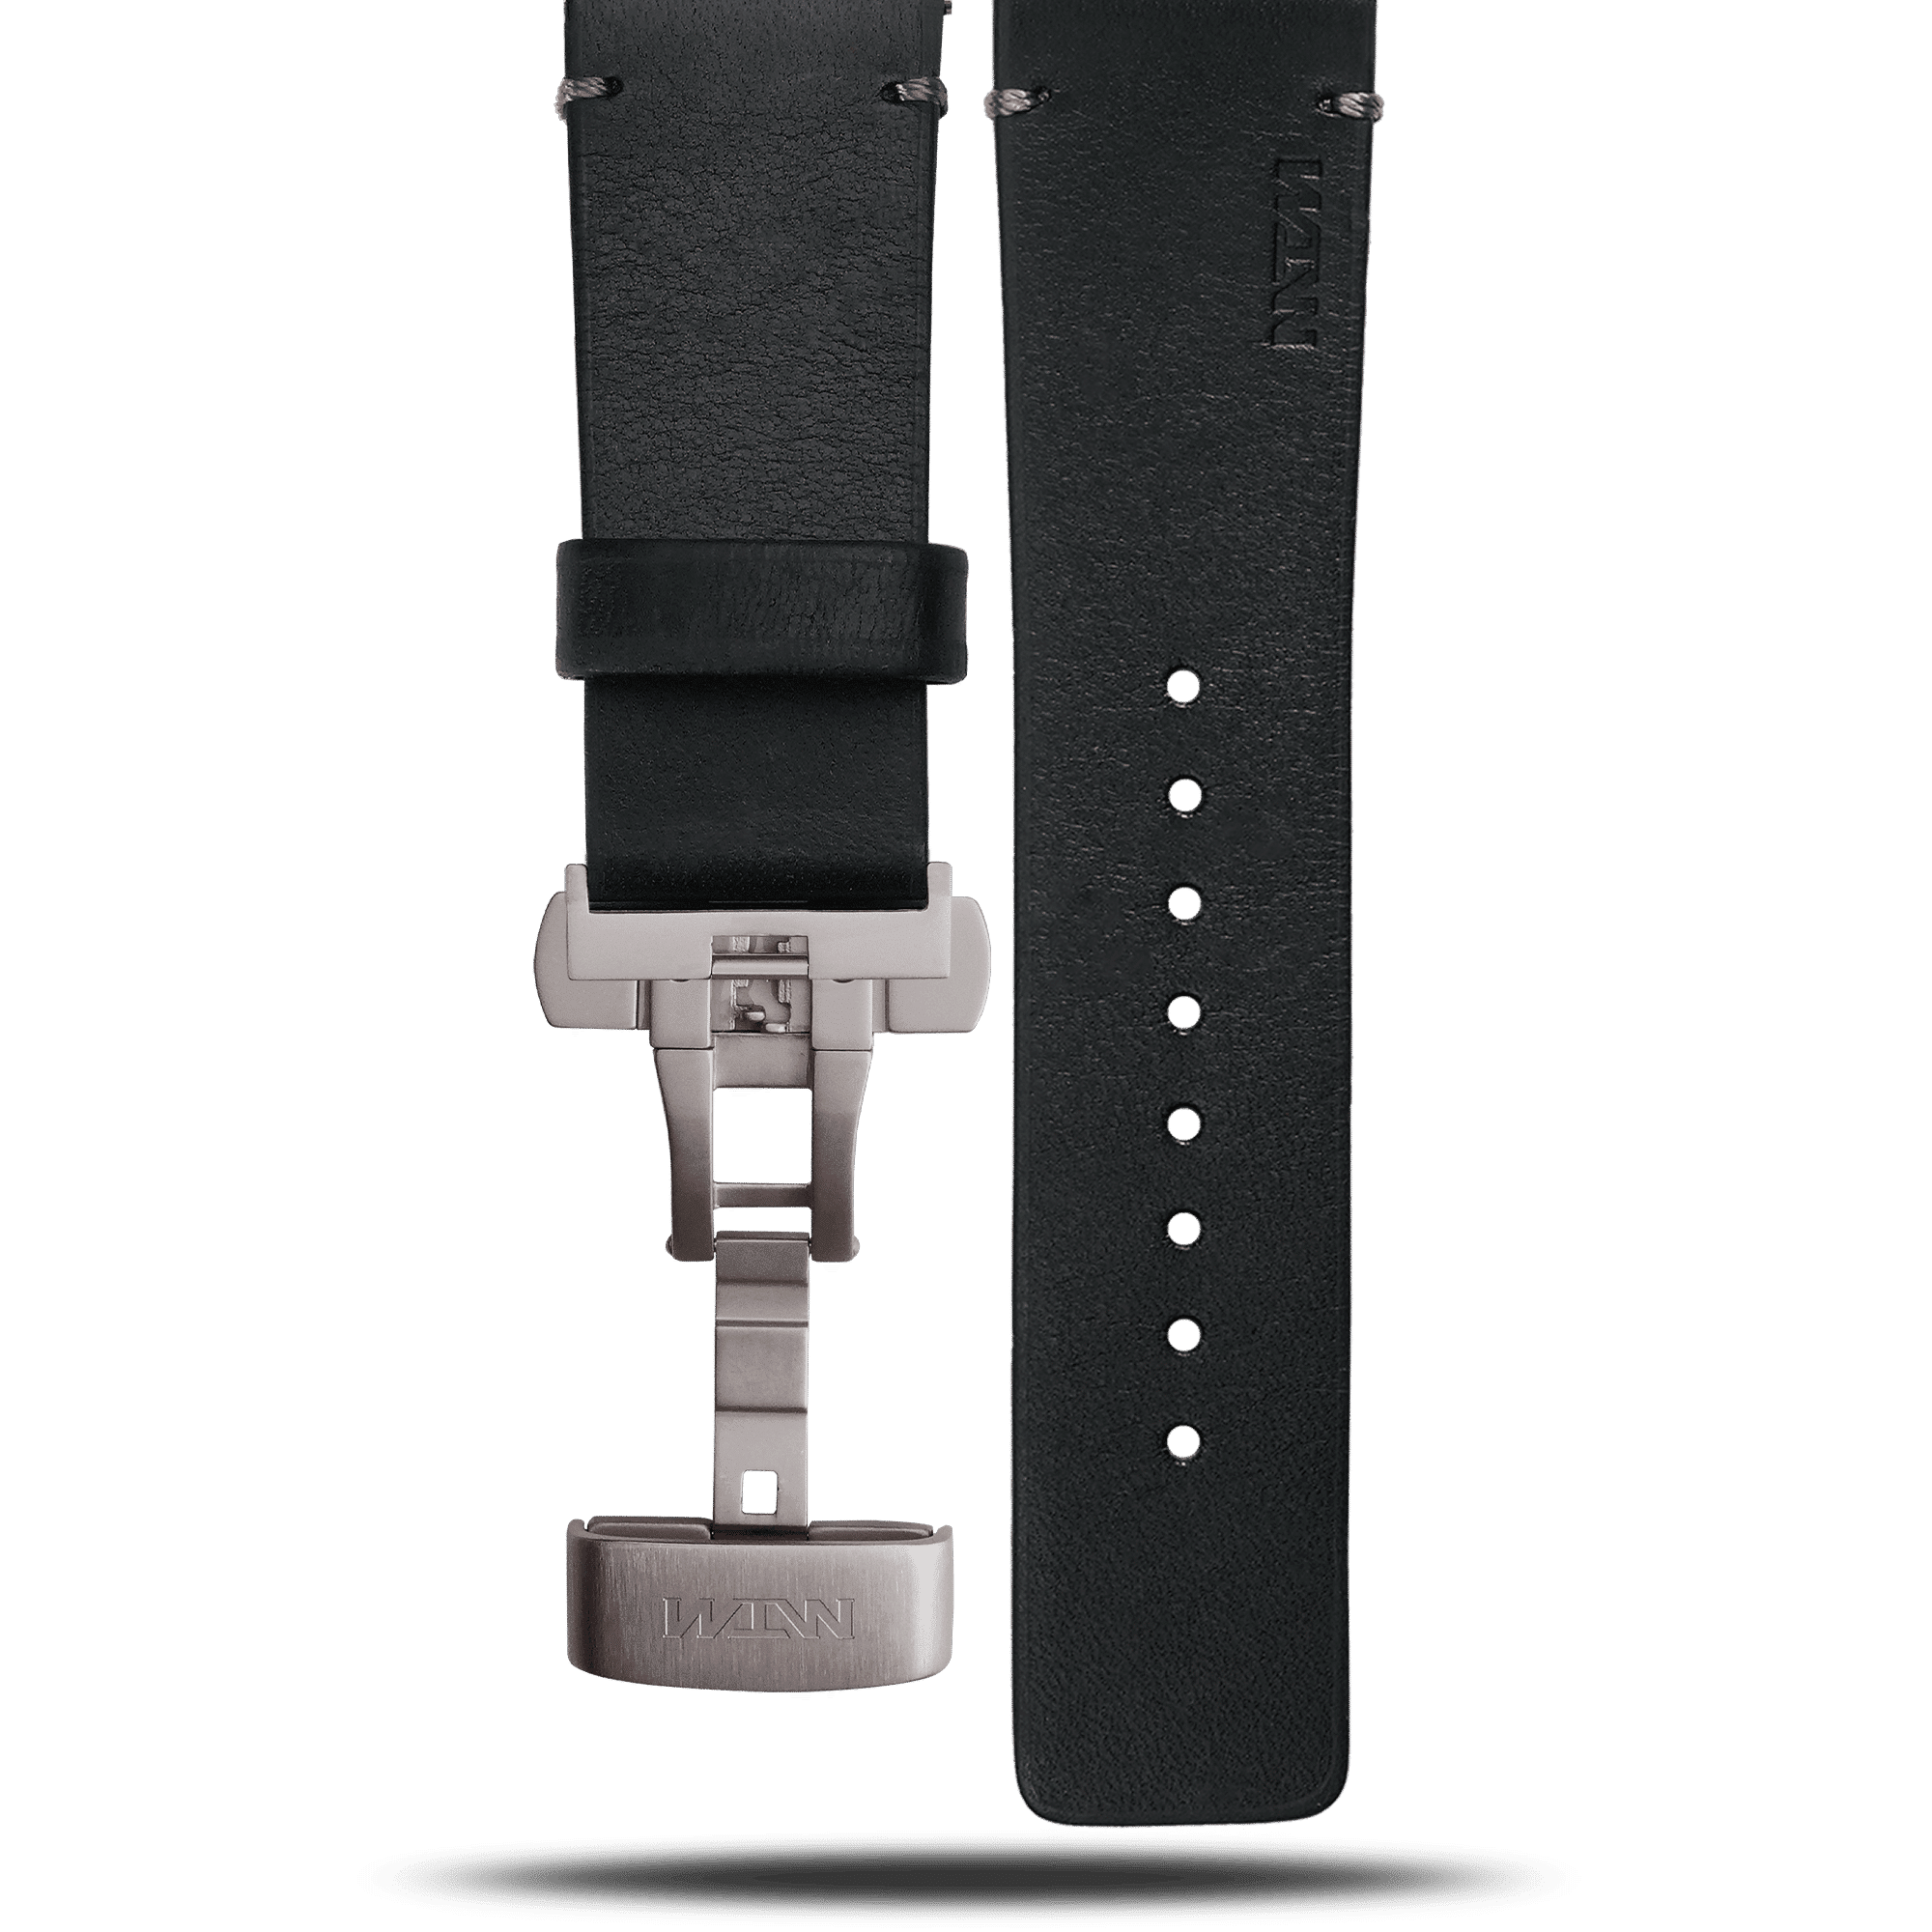 Leather Watch Bands & Straps